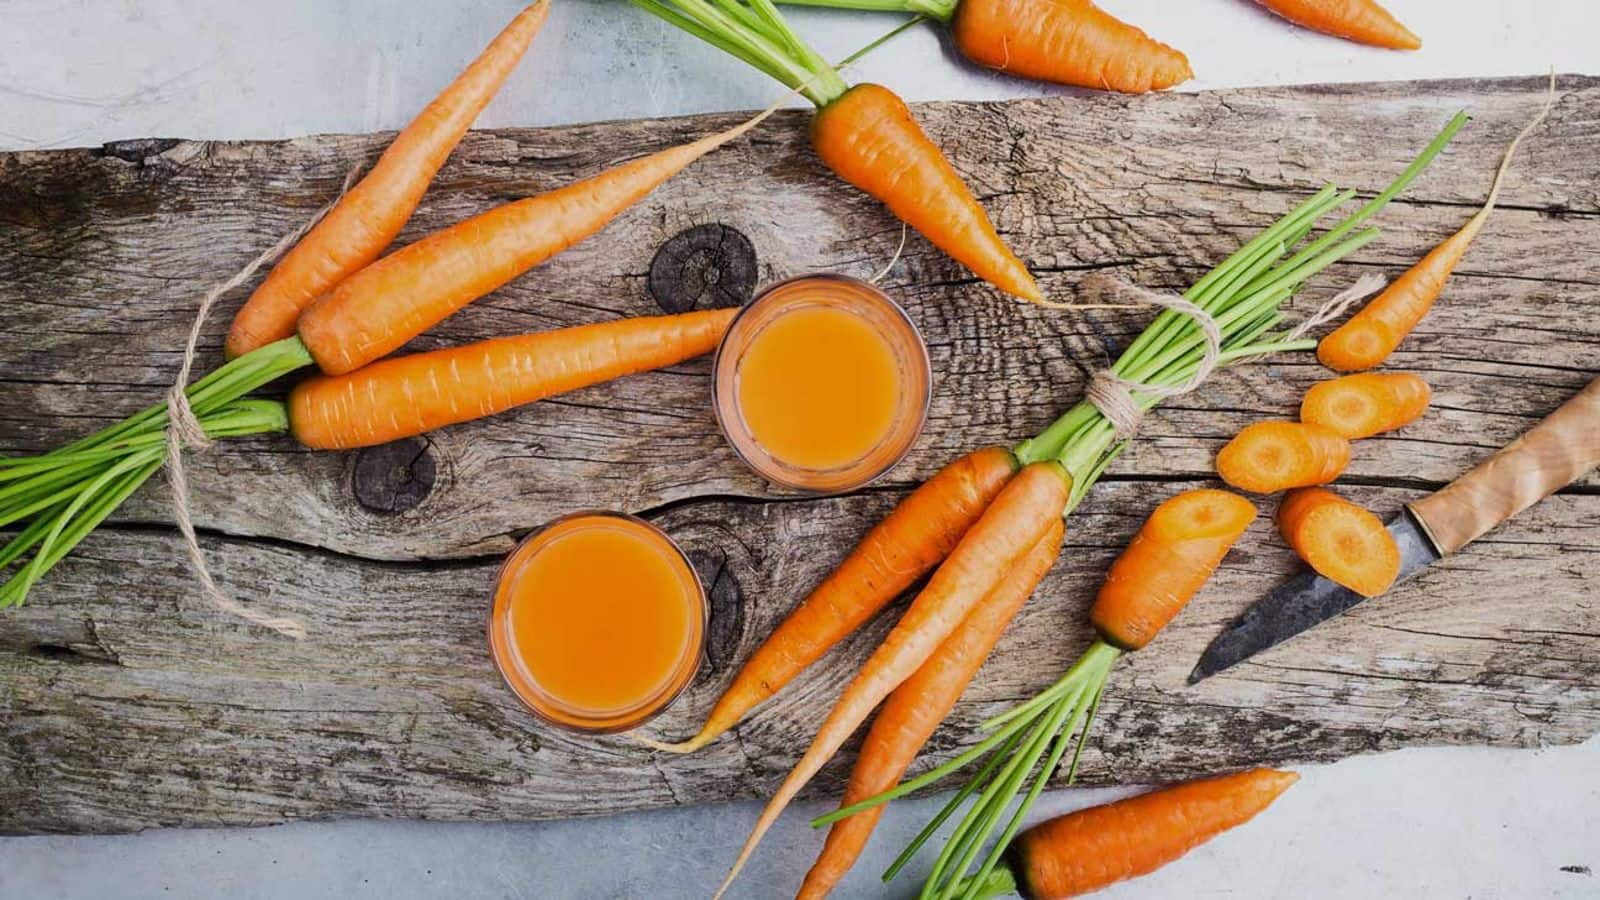 Nourish your vision with these carrot-based dishes